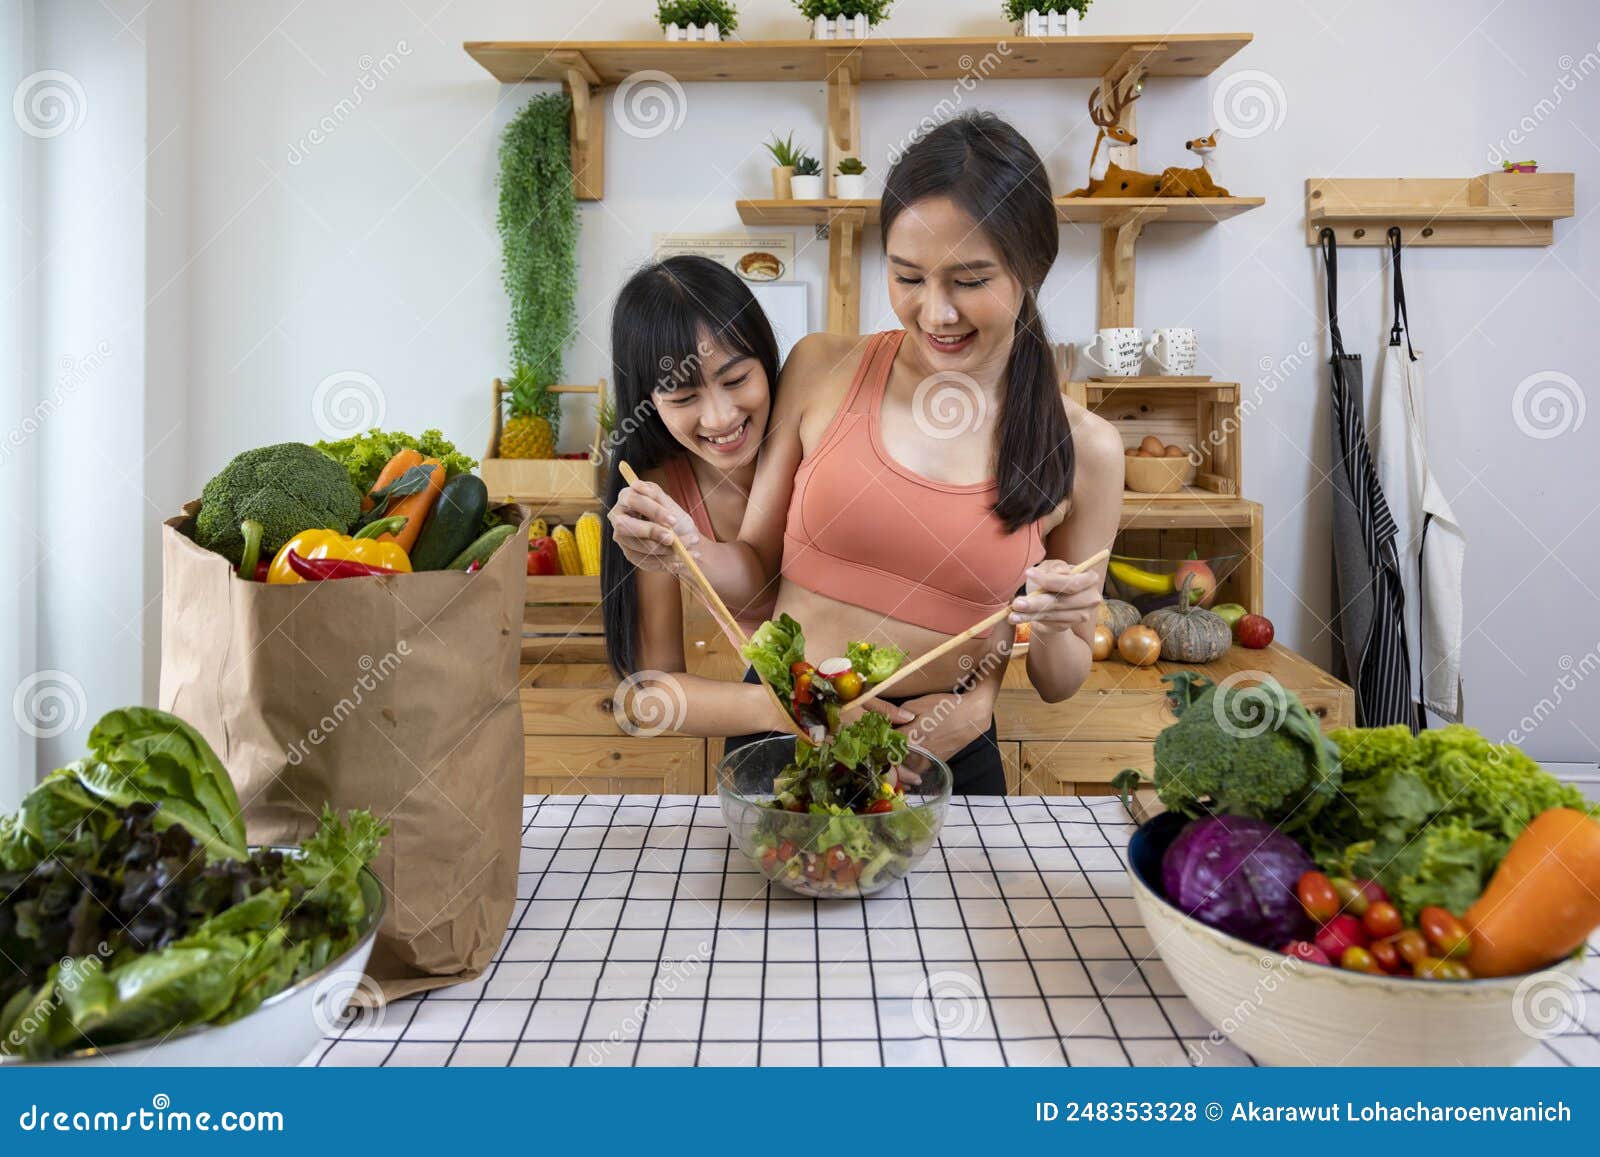 Asian Couple of Same Sex Marriage Cooking Healthy Salad Together in Kitchen during Pride Month To Promote Equality and Differences Stock Photo